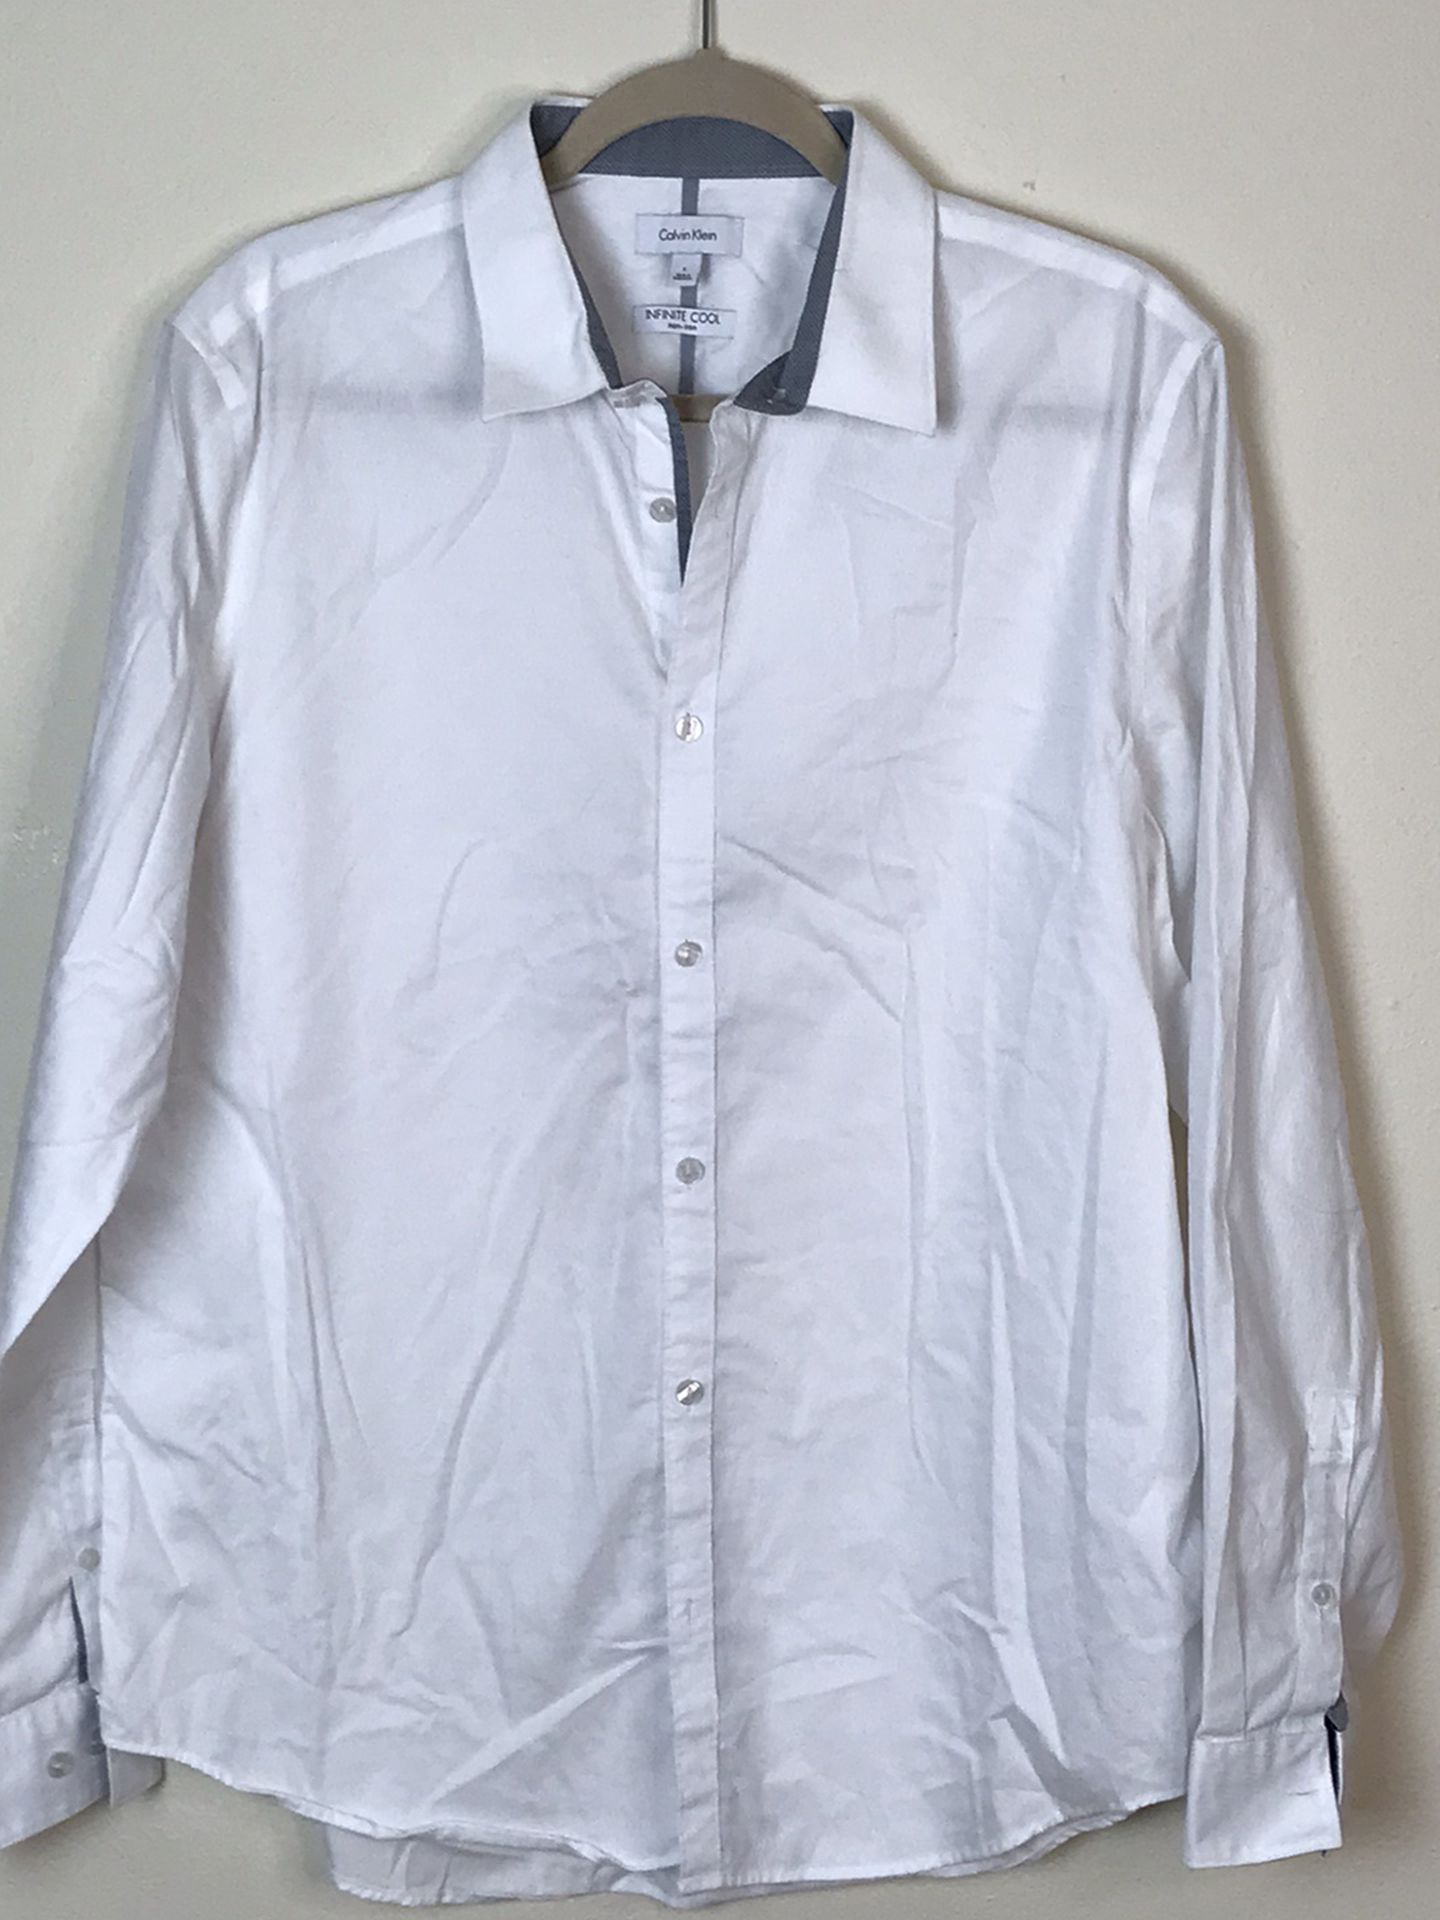 "Infinite Cool" CALVIN KLEIN Non-Iron Shirt_SlimFit_Size L White Gently used